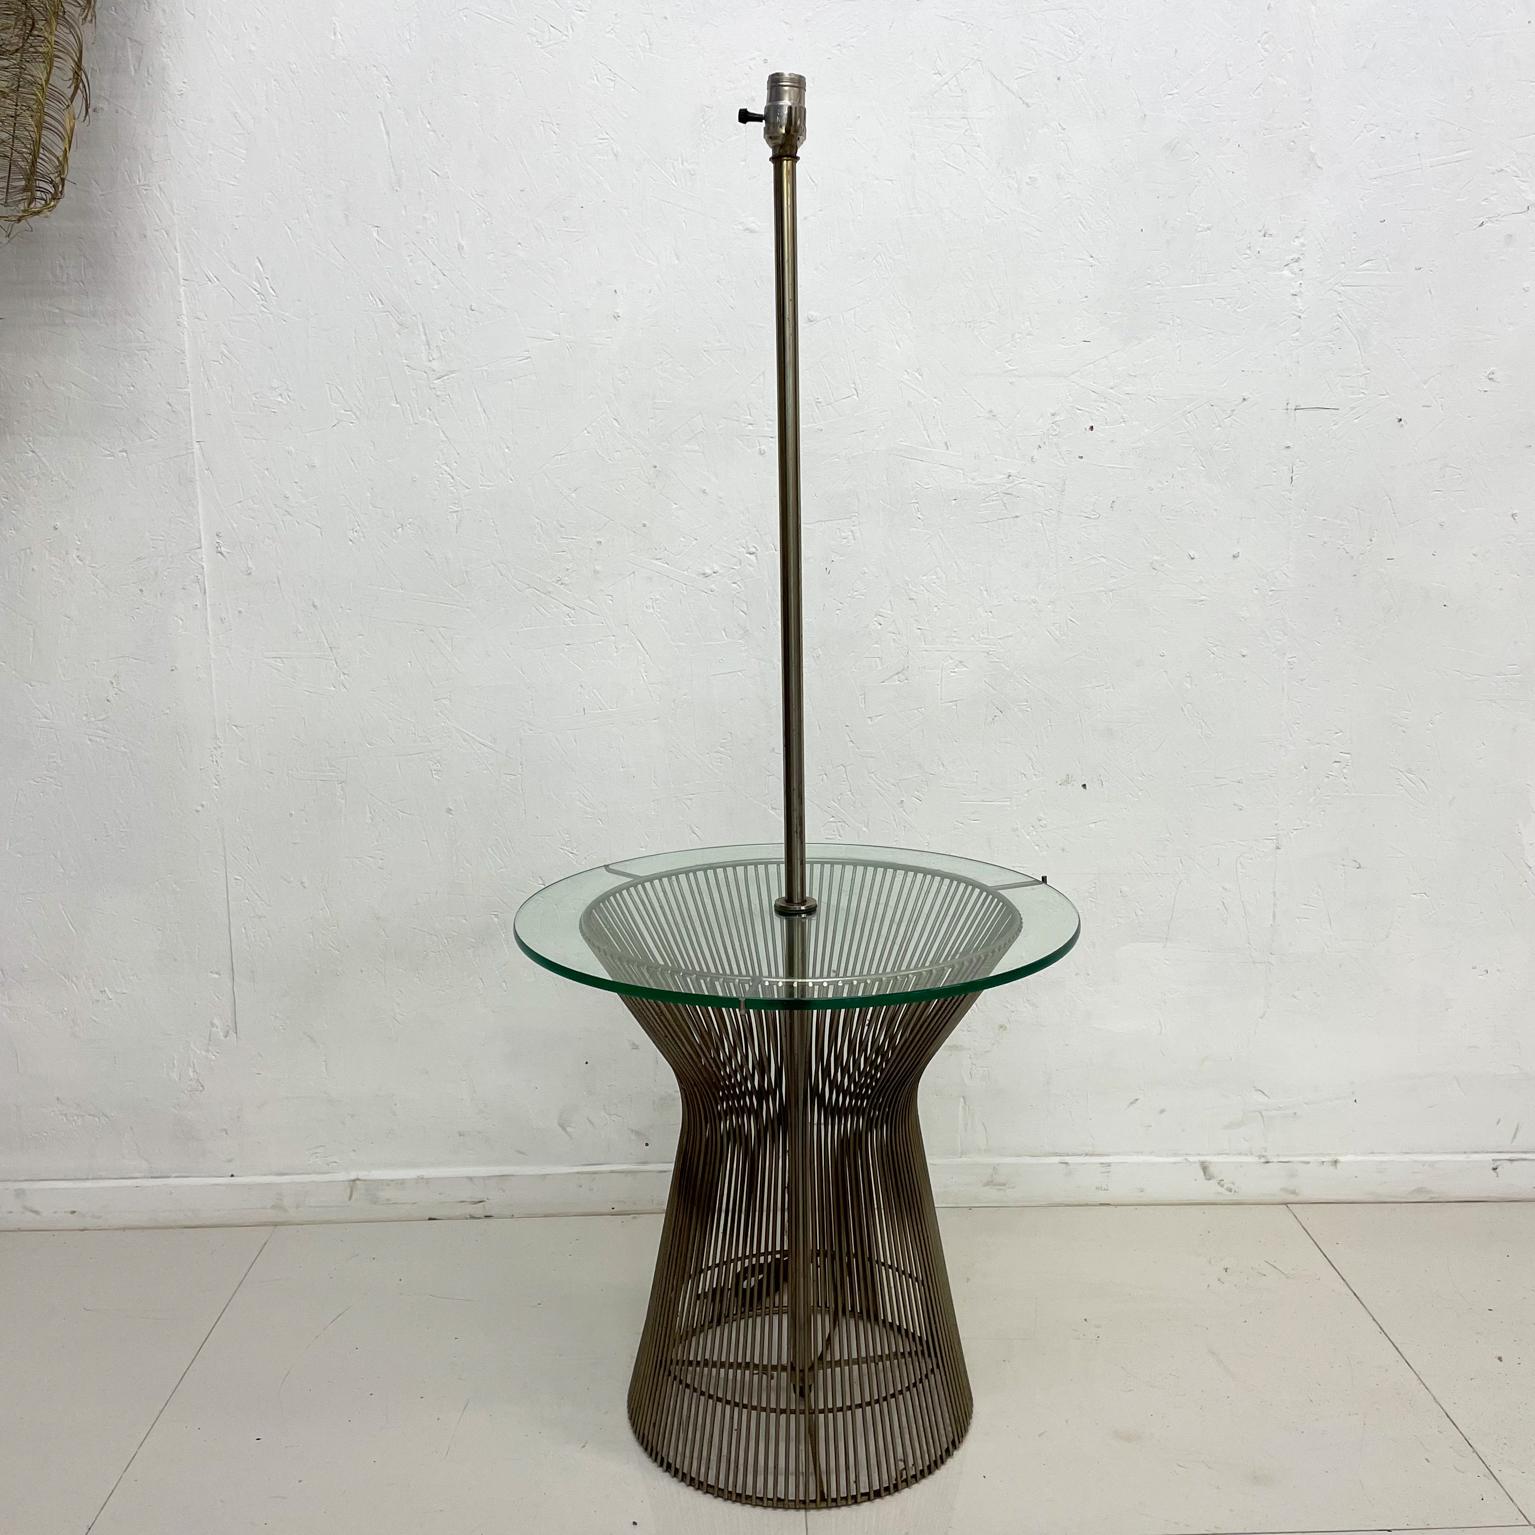 Floor lamp table
1970s Warren Platner for Knoll combination side table with floor lamp.
Metal wire round side table with glass top.
Unmarked attribution Warren Platner.
20 diameter 19.13 height table top and 47 to base of socket
Preowned